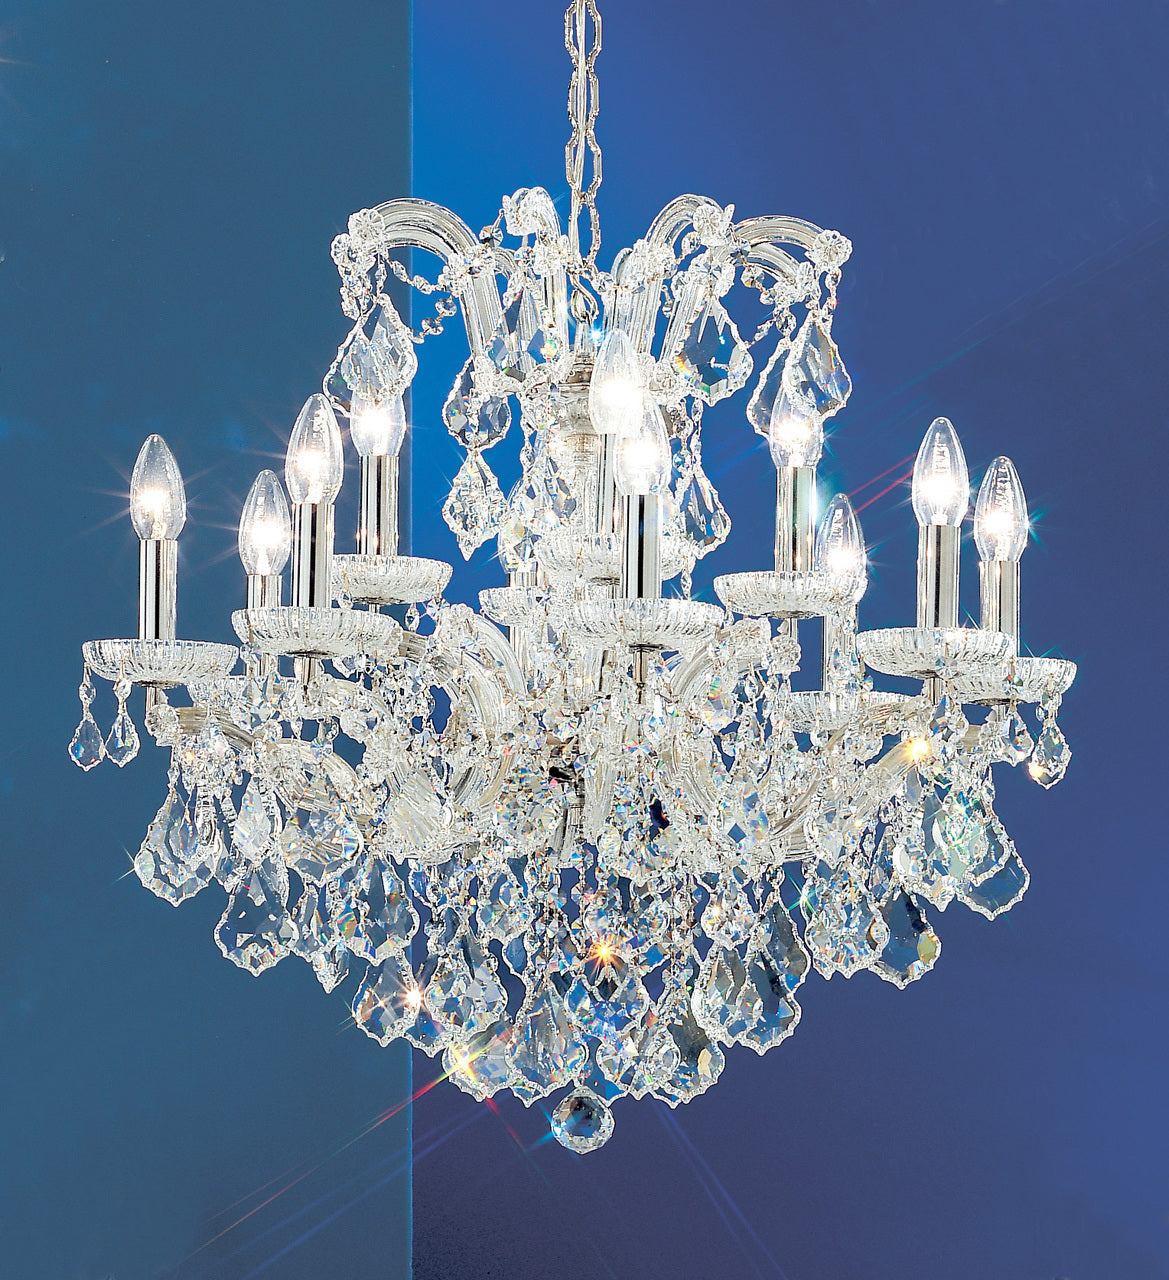 Classic Lighting 8132 CH C Maria Theresa Traditional Crystal Chandelier in Chrome (Imported from Italy)